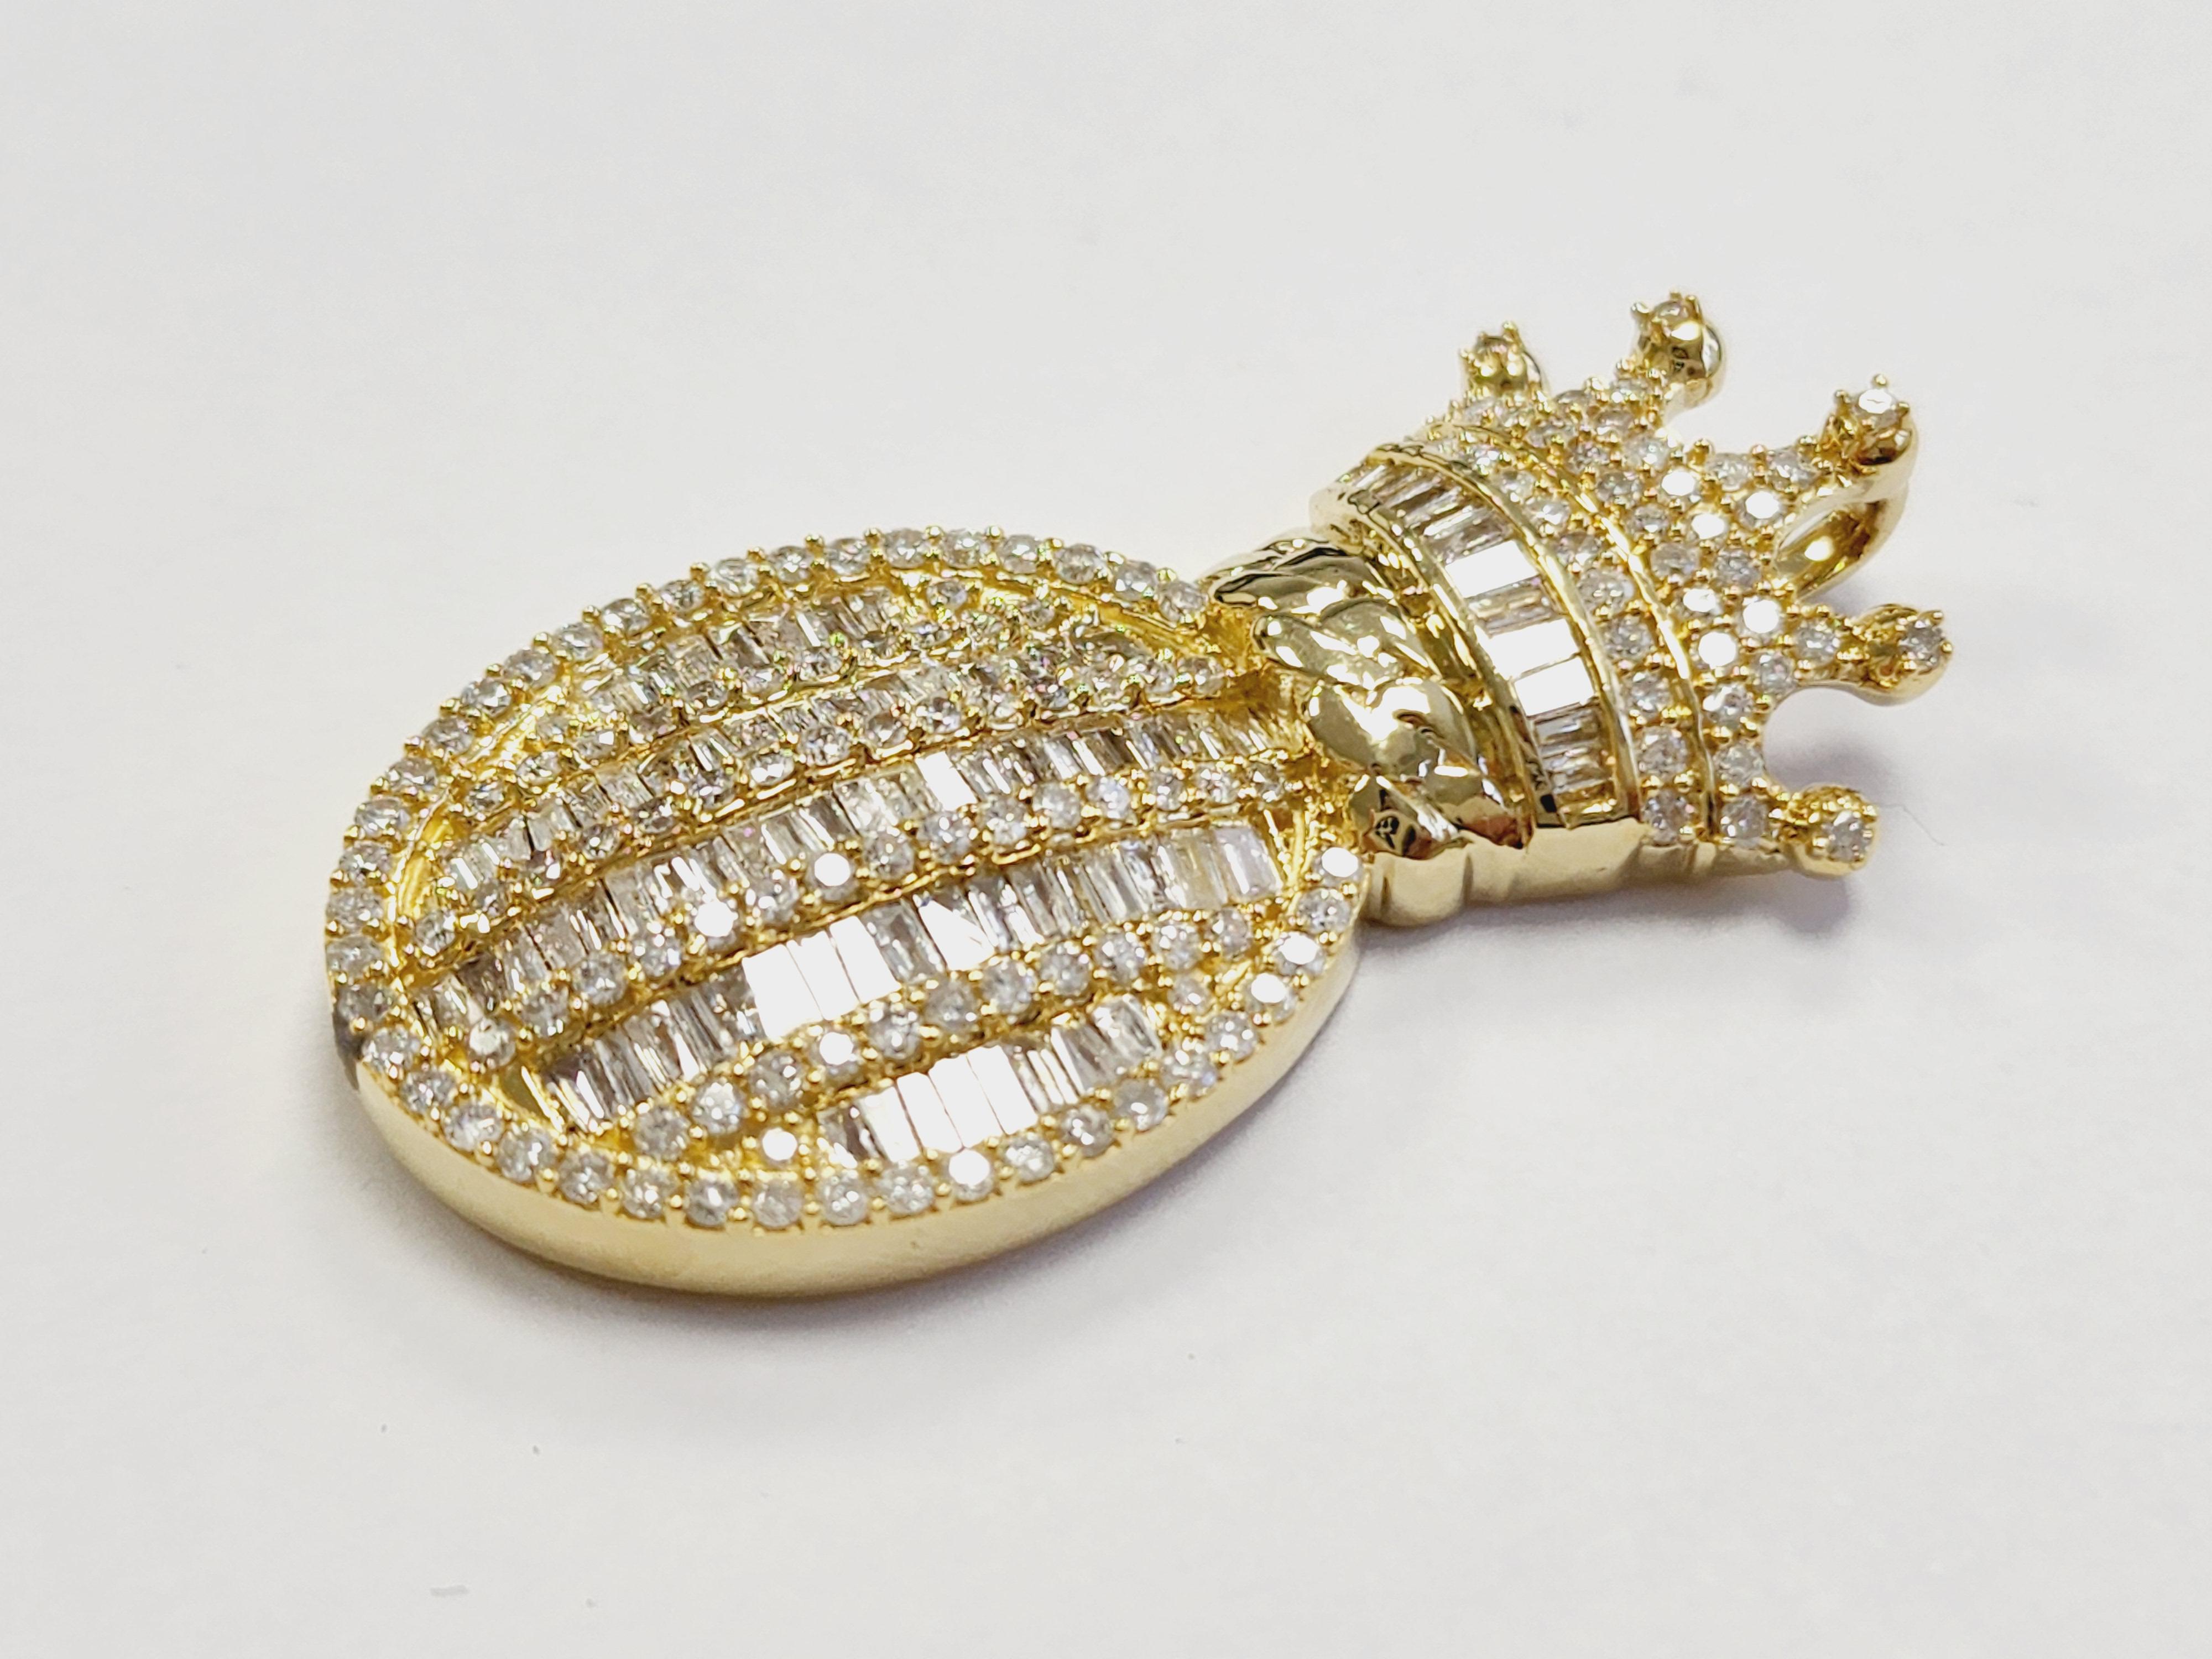 Beautiful shiny, 2 cttw Pineapple Shape Pendant 14 Karat Yellow Gold. average Color H-I, Clarity SI-I.
Channel Set of Baguettes and Round Natural Diamonds. (Pendant Only)
Measurement 1.50 inch long x 0.75 inch wide x 0.25 inch height